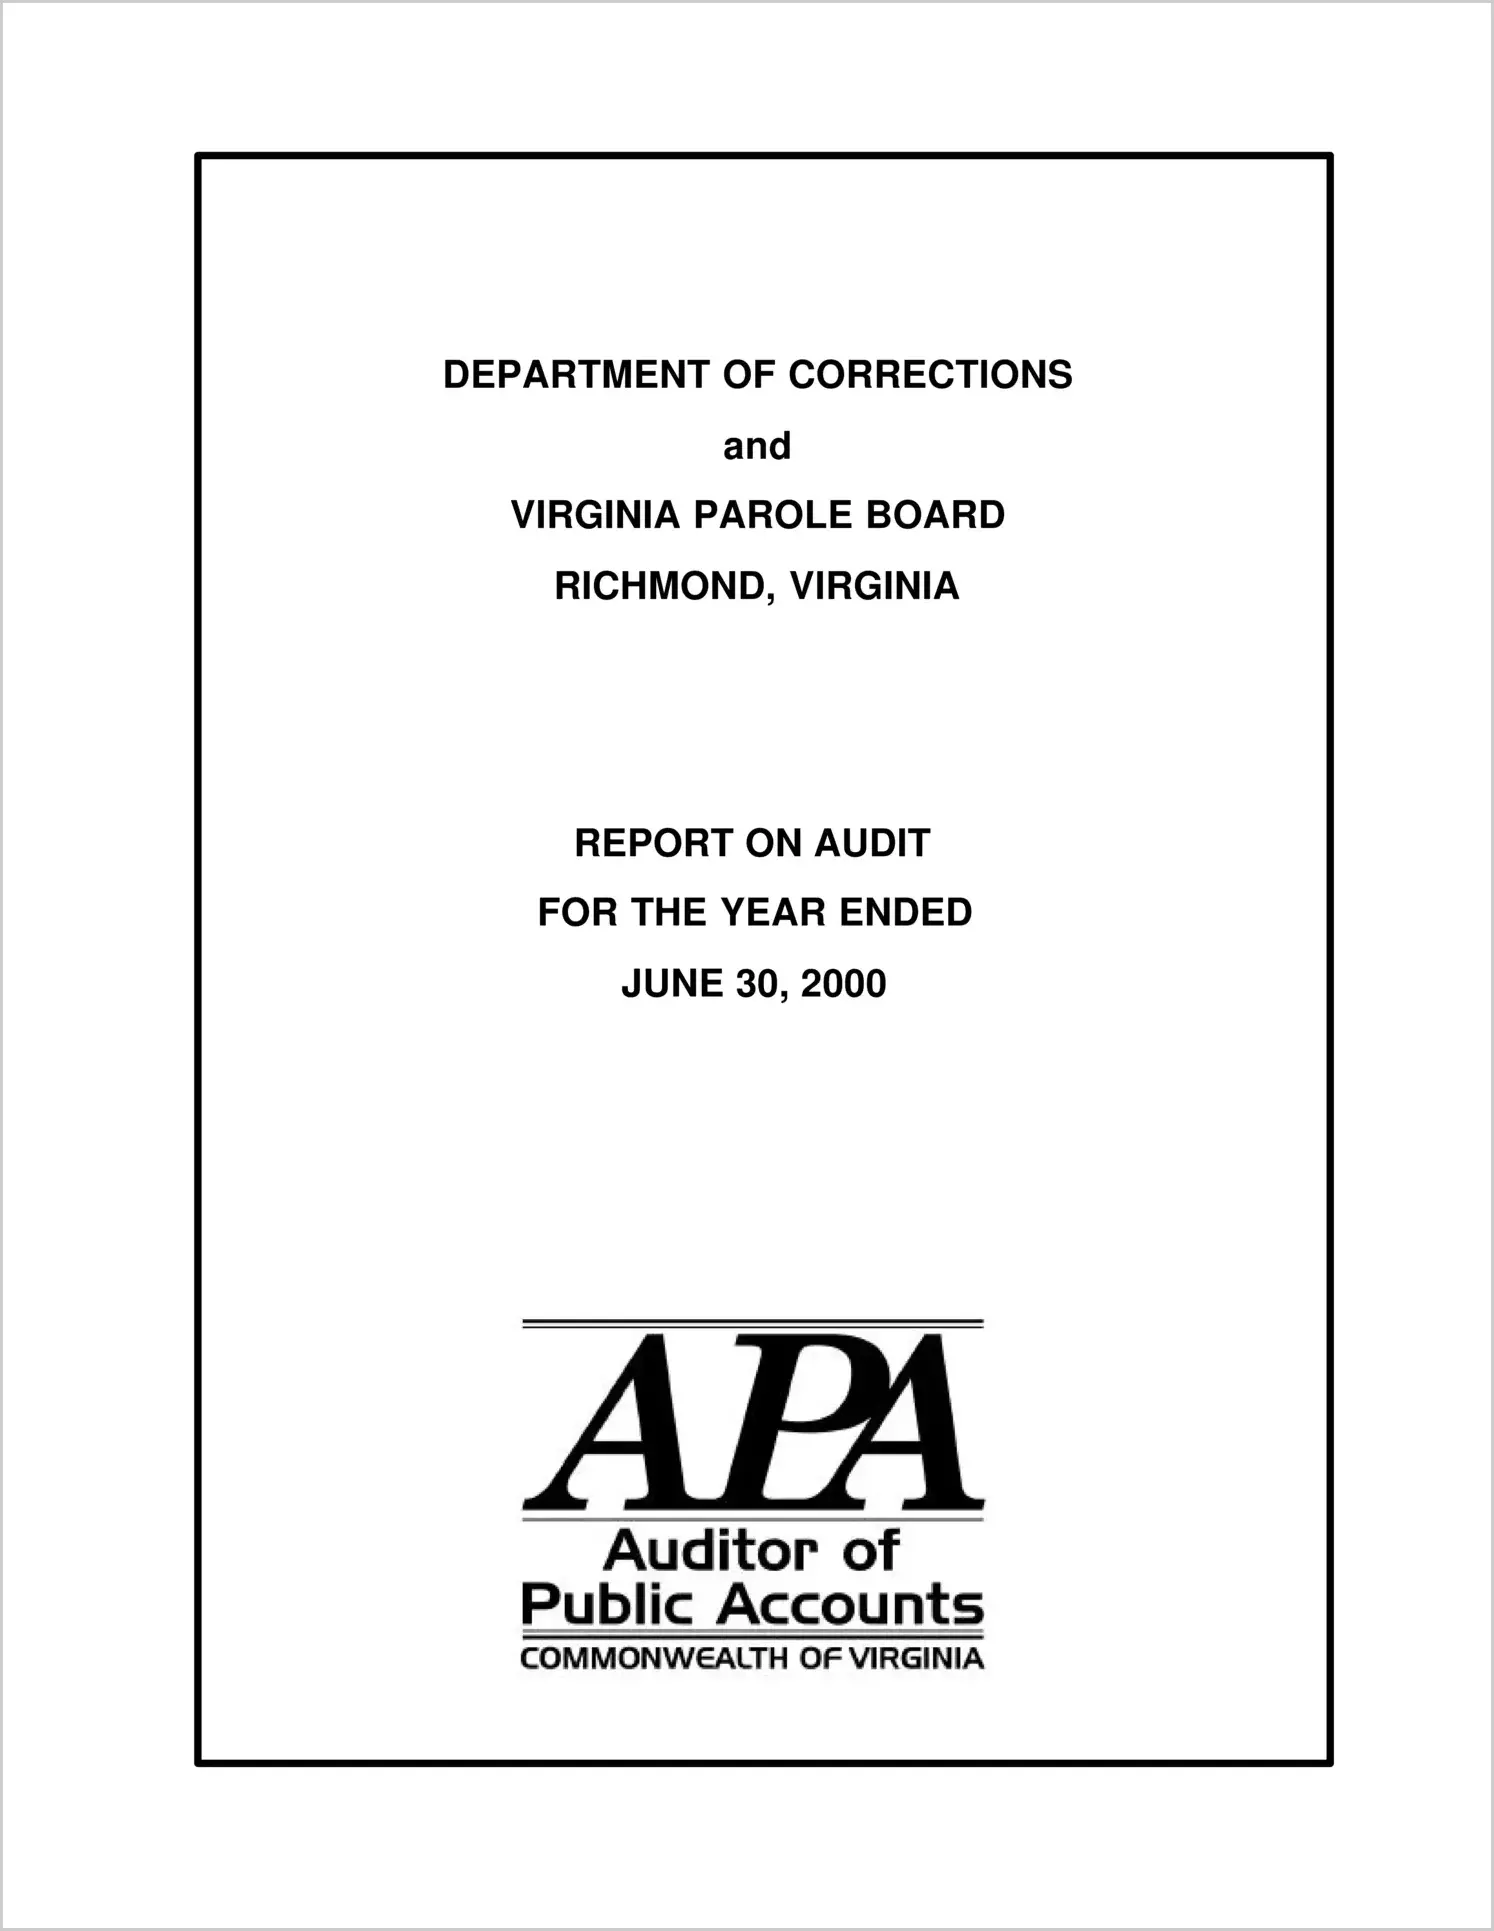 Department of Corrections and Virginia Parole Board for the year ended June 30, 2000